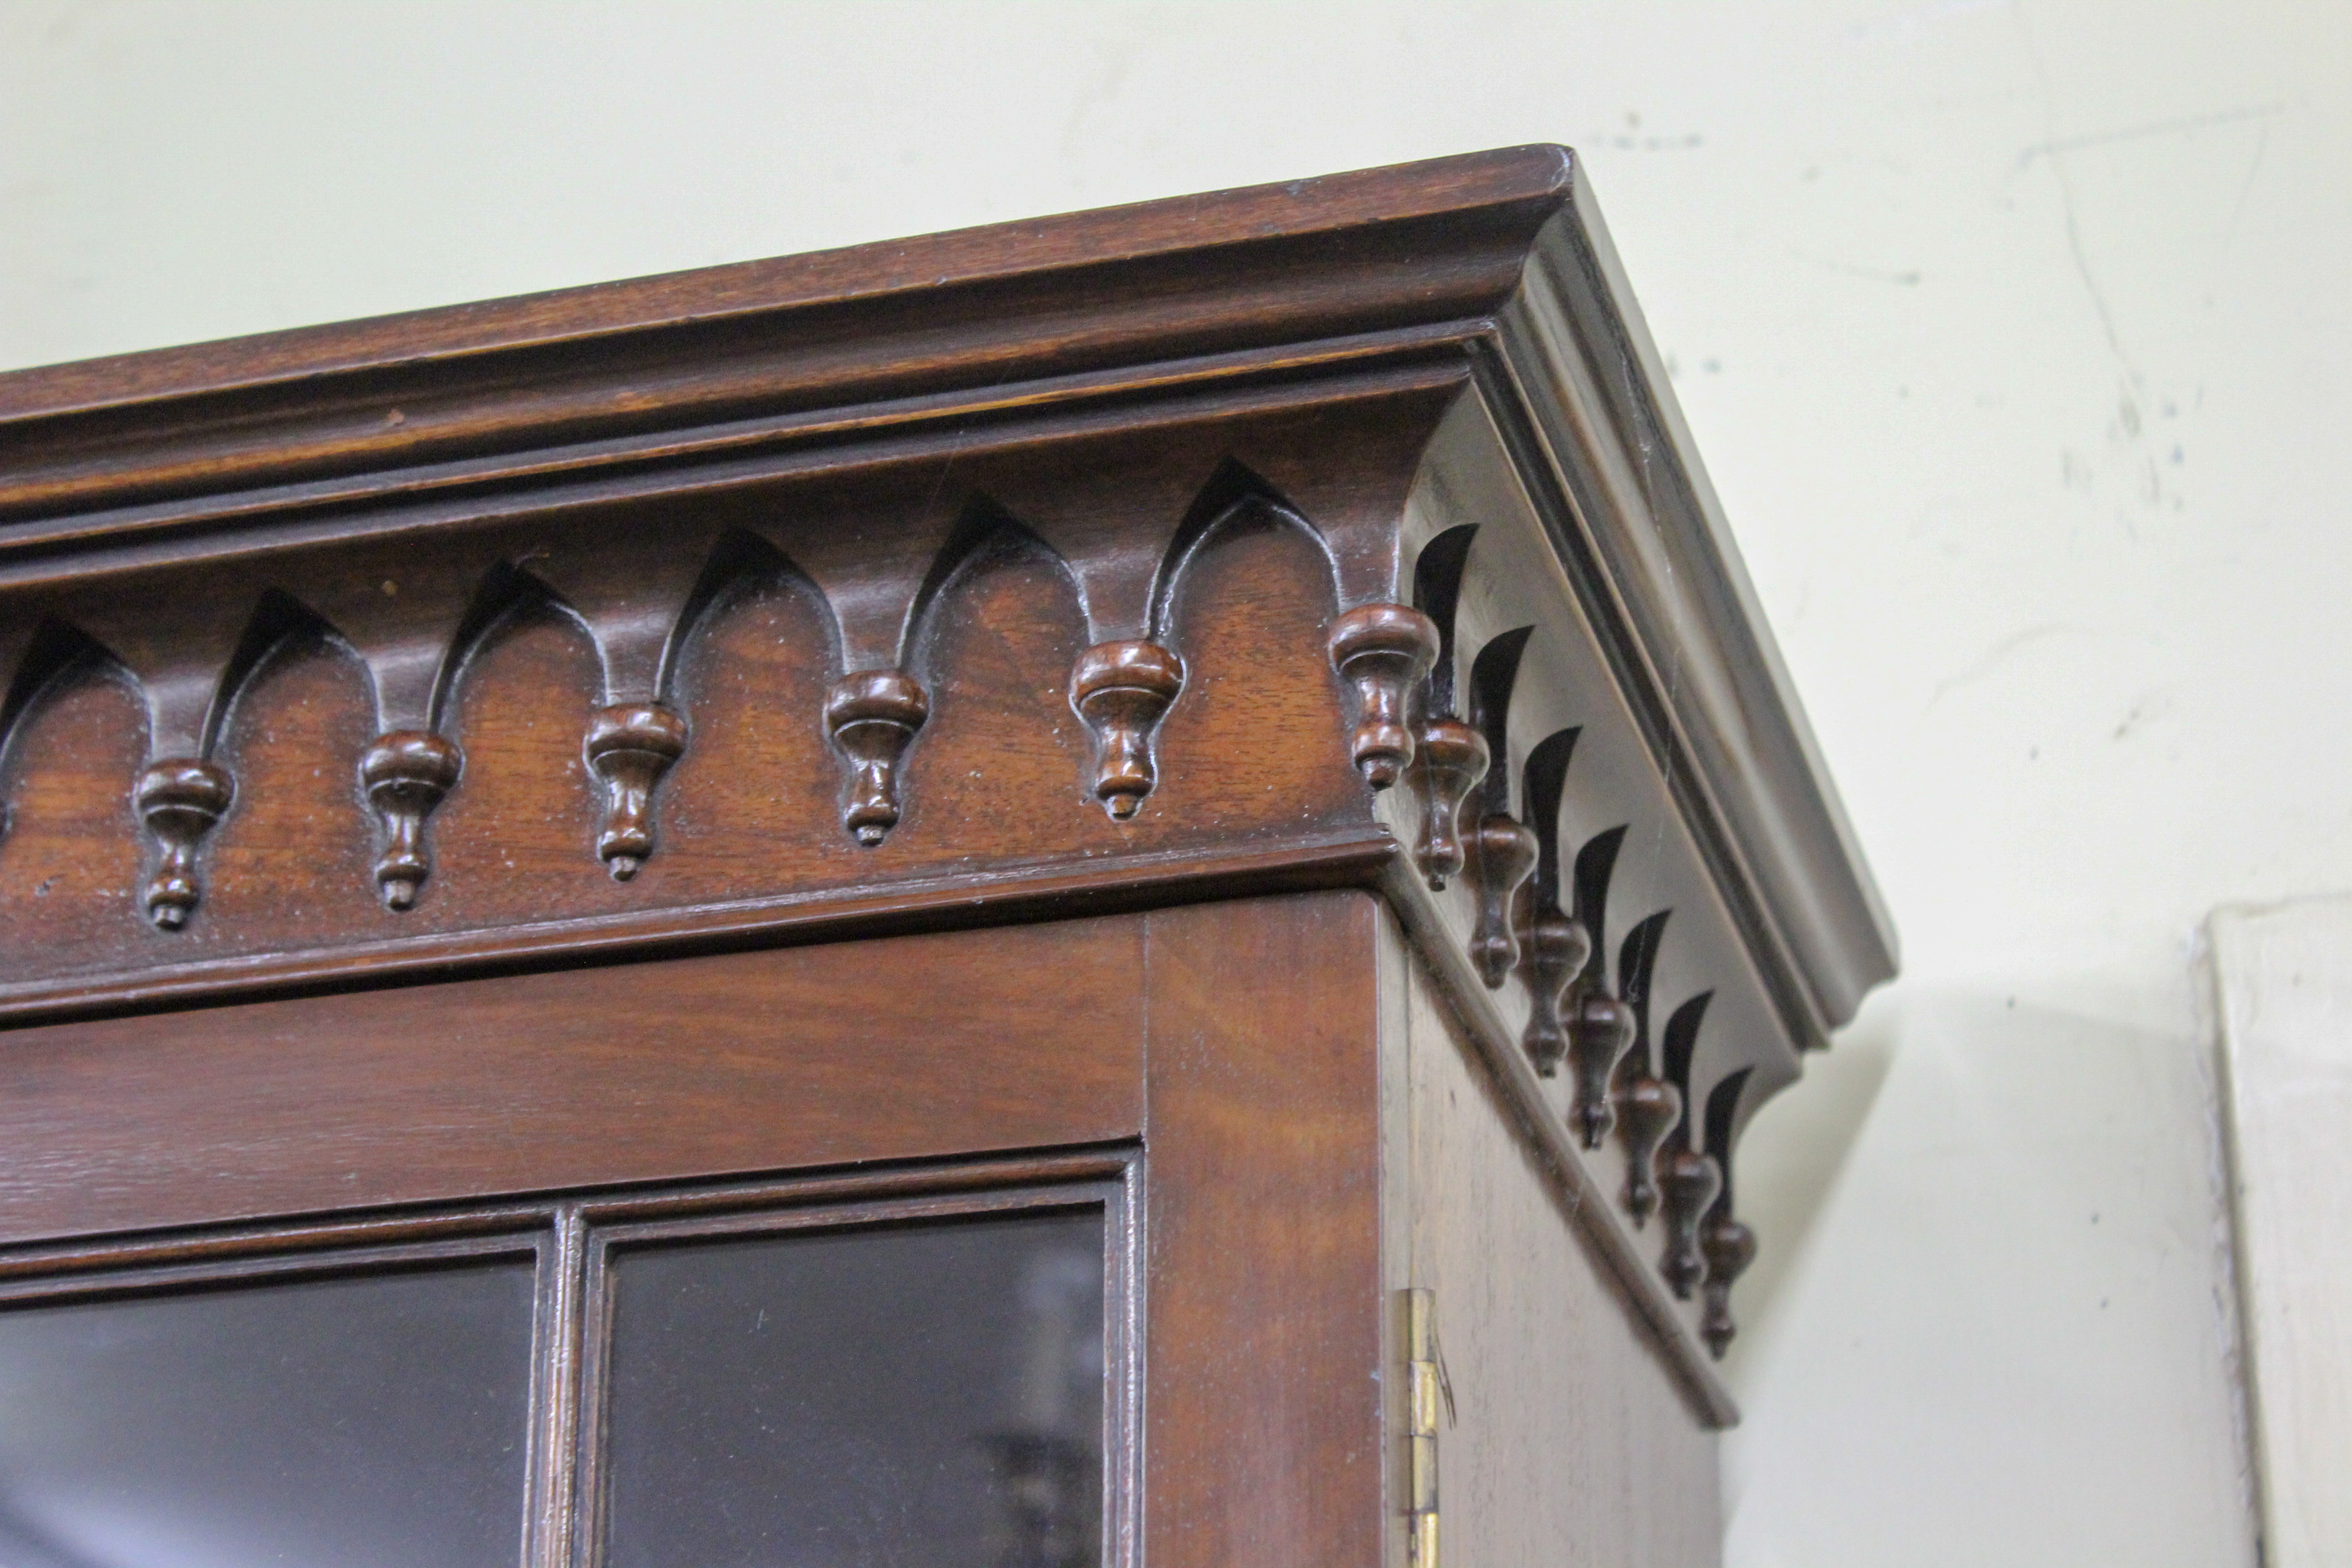 An English Chippendale Mahogany Bureau Bookcase with Tear Drop Crown Molding